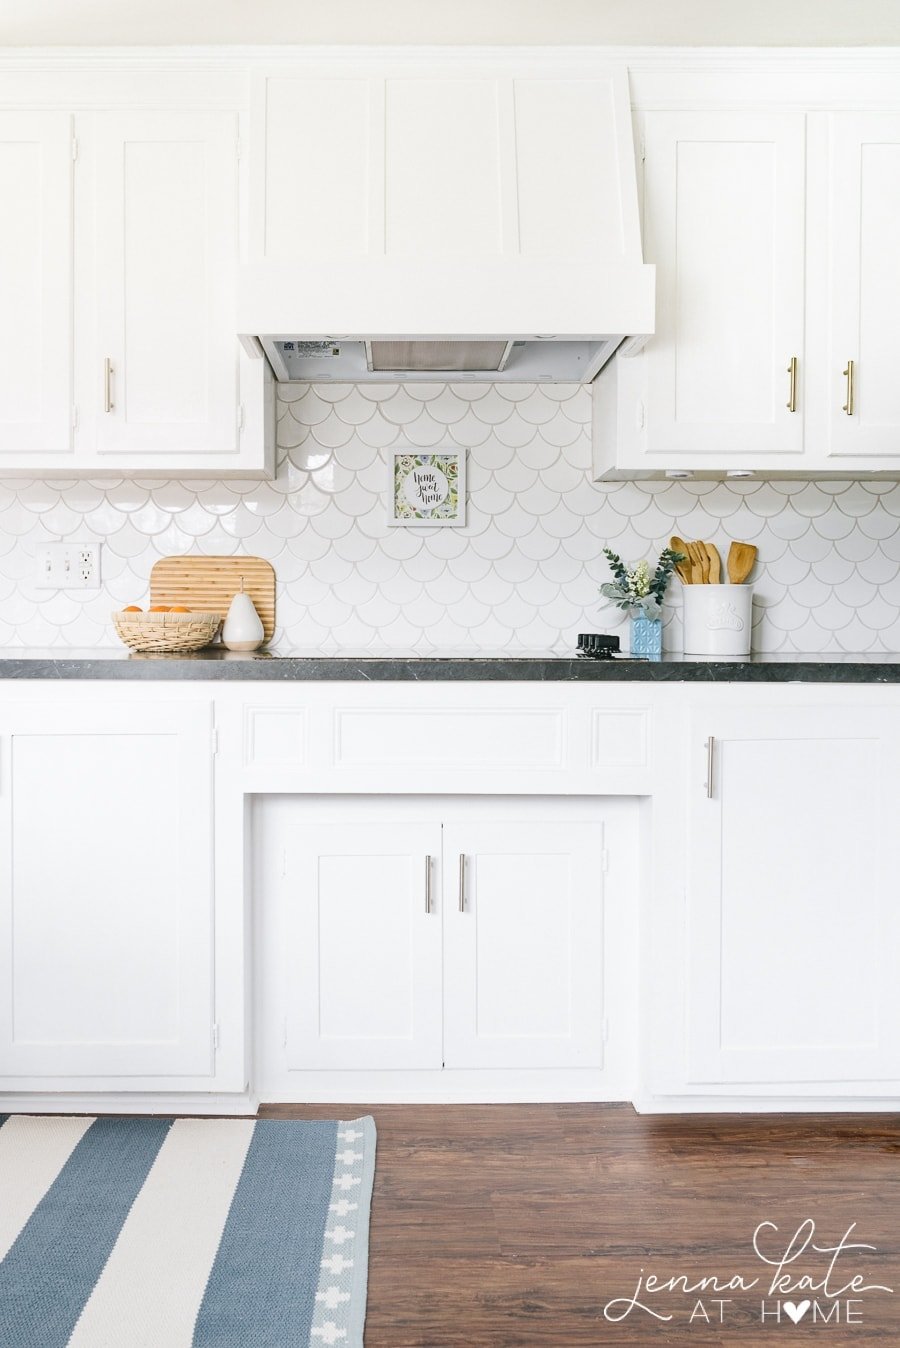 A stovetop with a large, white hood cover and white tile backsplash